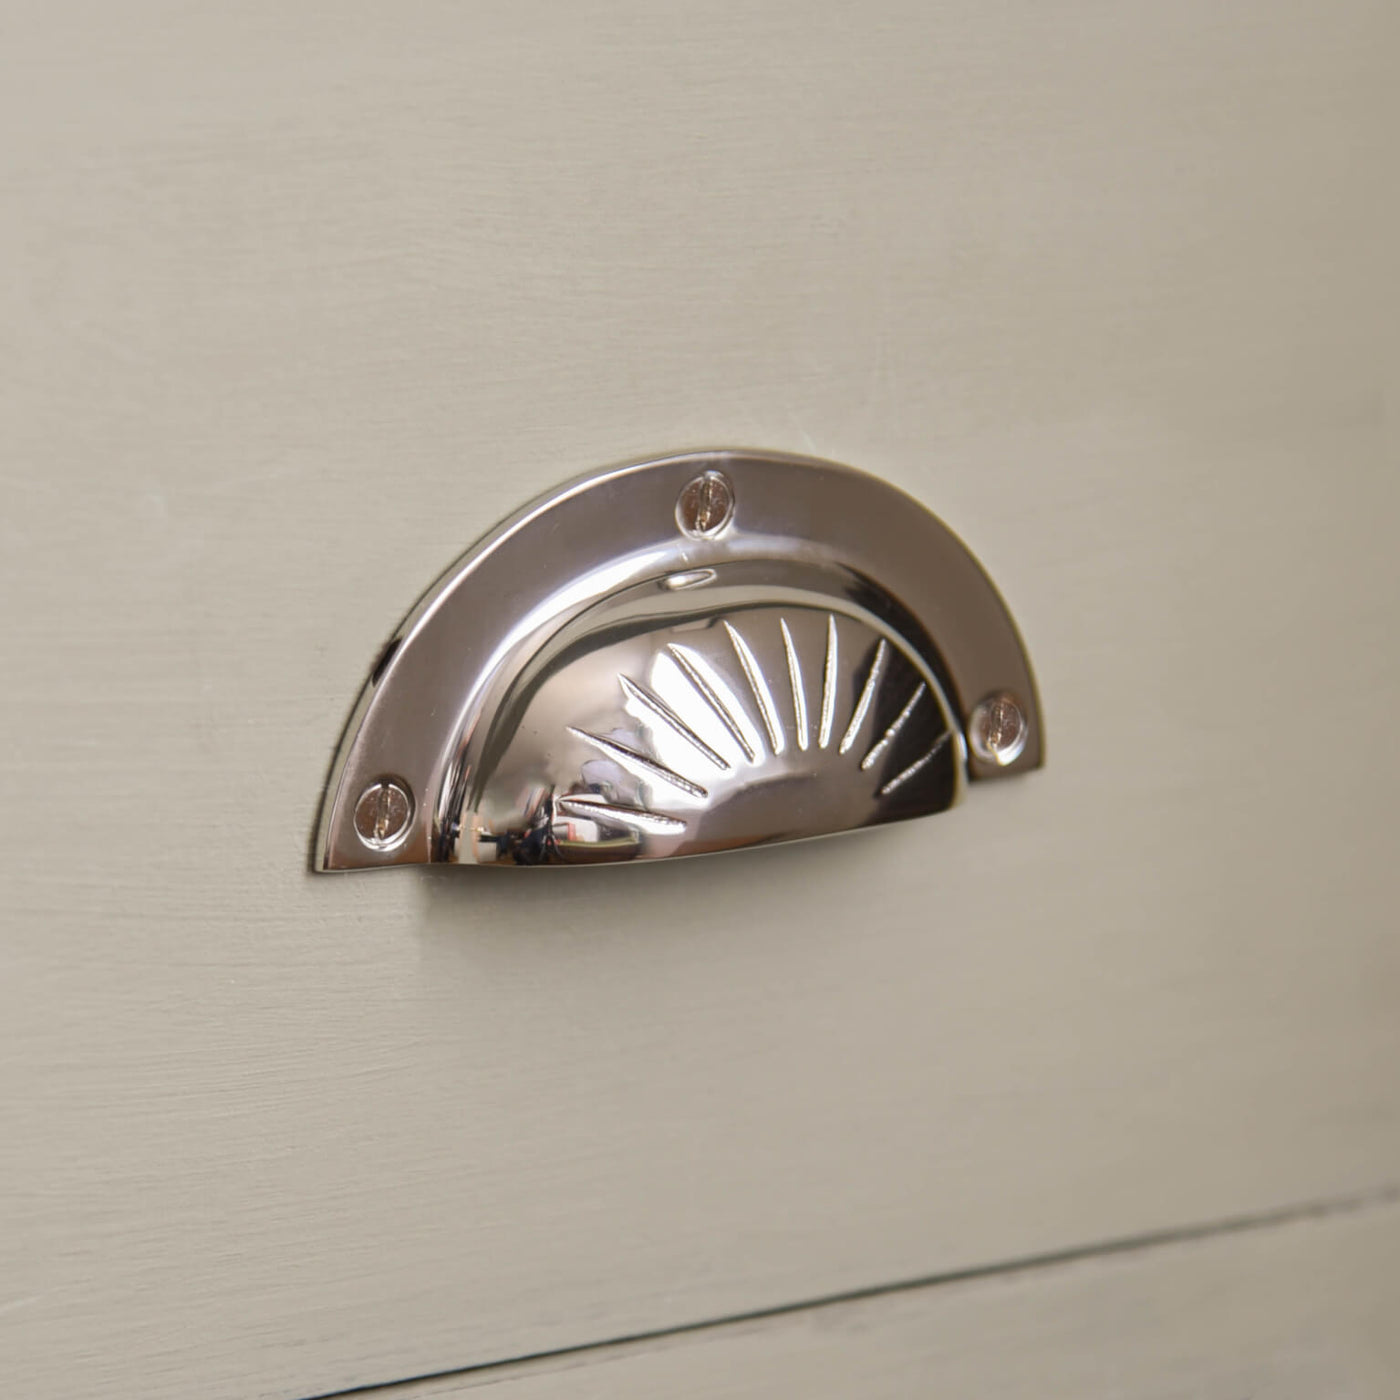 fluted hooded cup handle on kitchen drawers